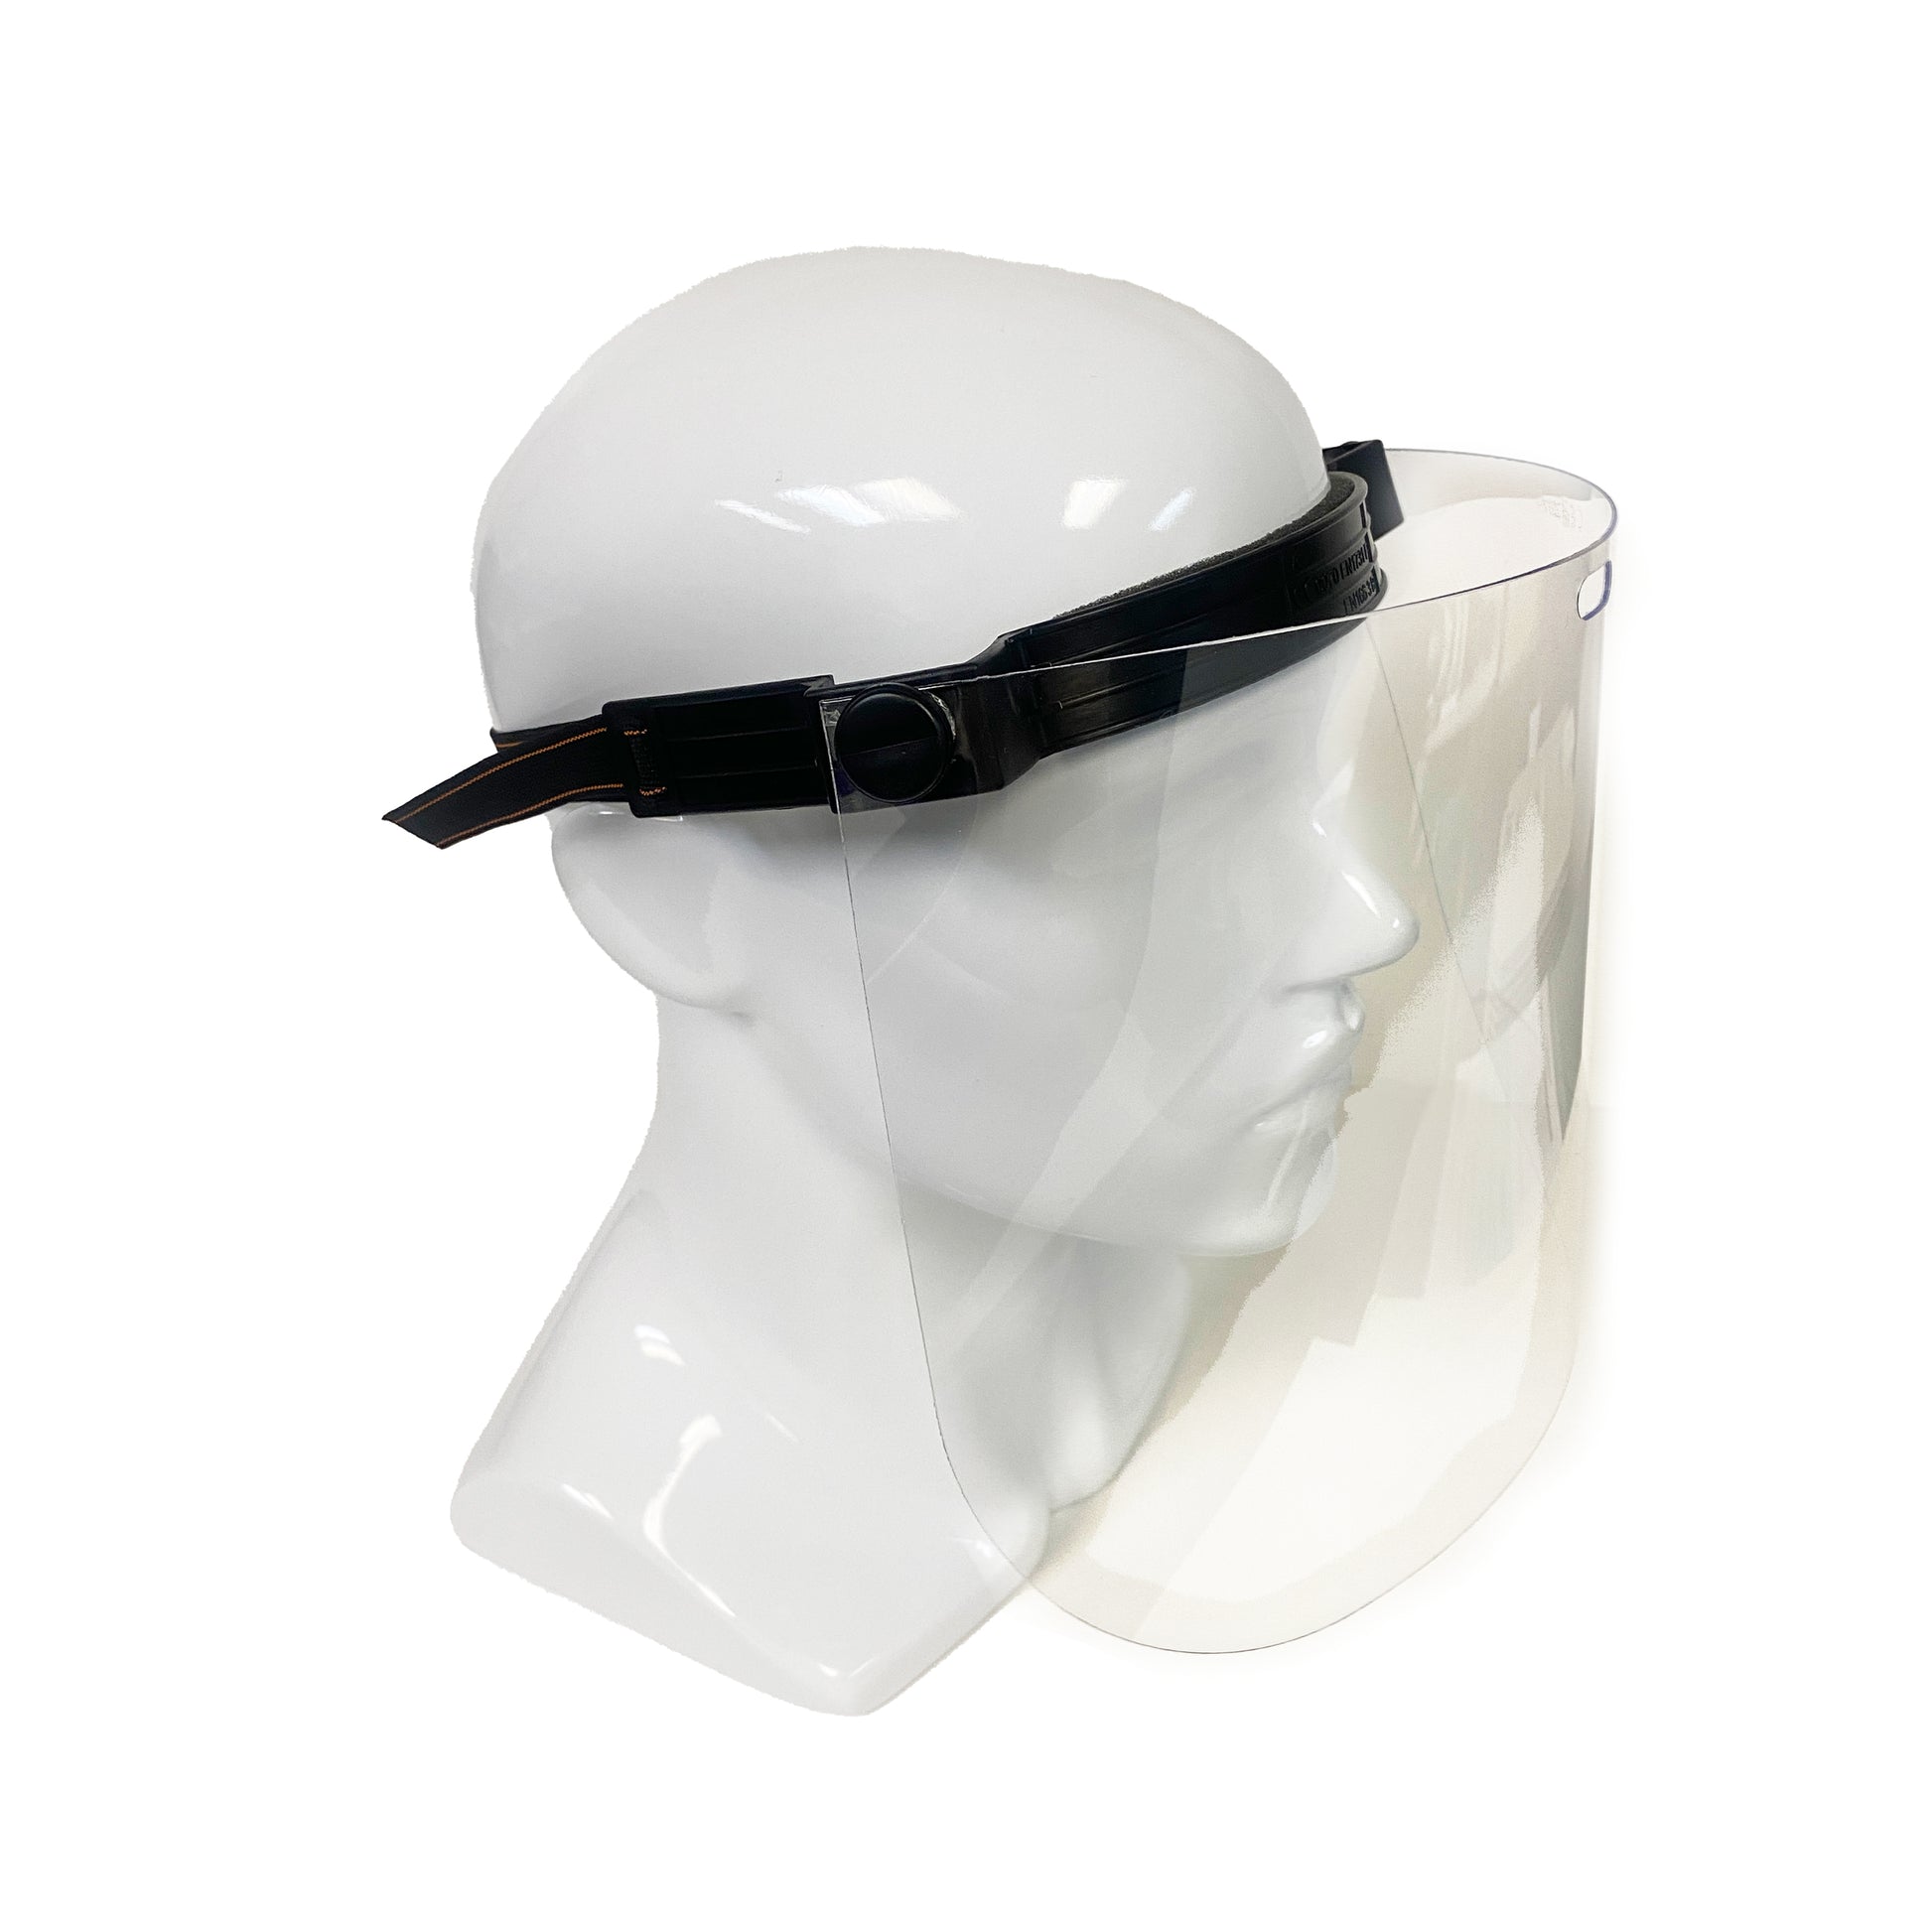 Lucent Path 2 Packs Flip Up Face Shield - Safety Clear Plastic Visor Anti Fog Reusable Adjustable Face Shields